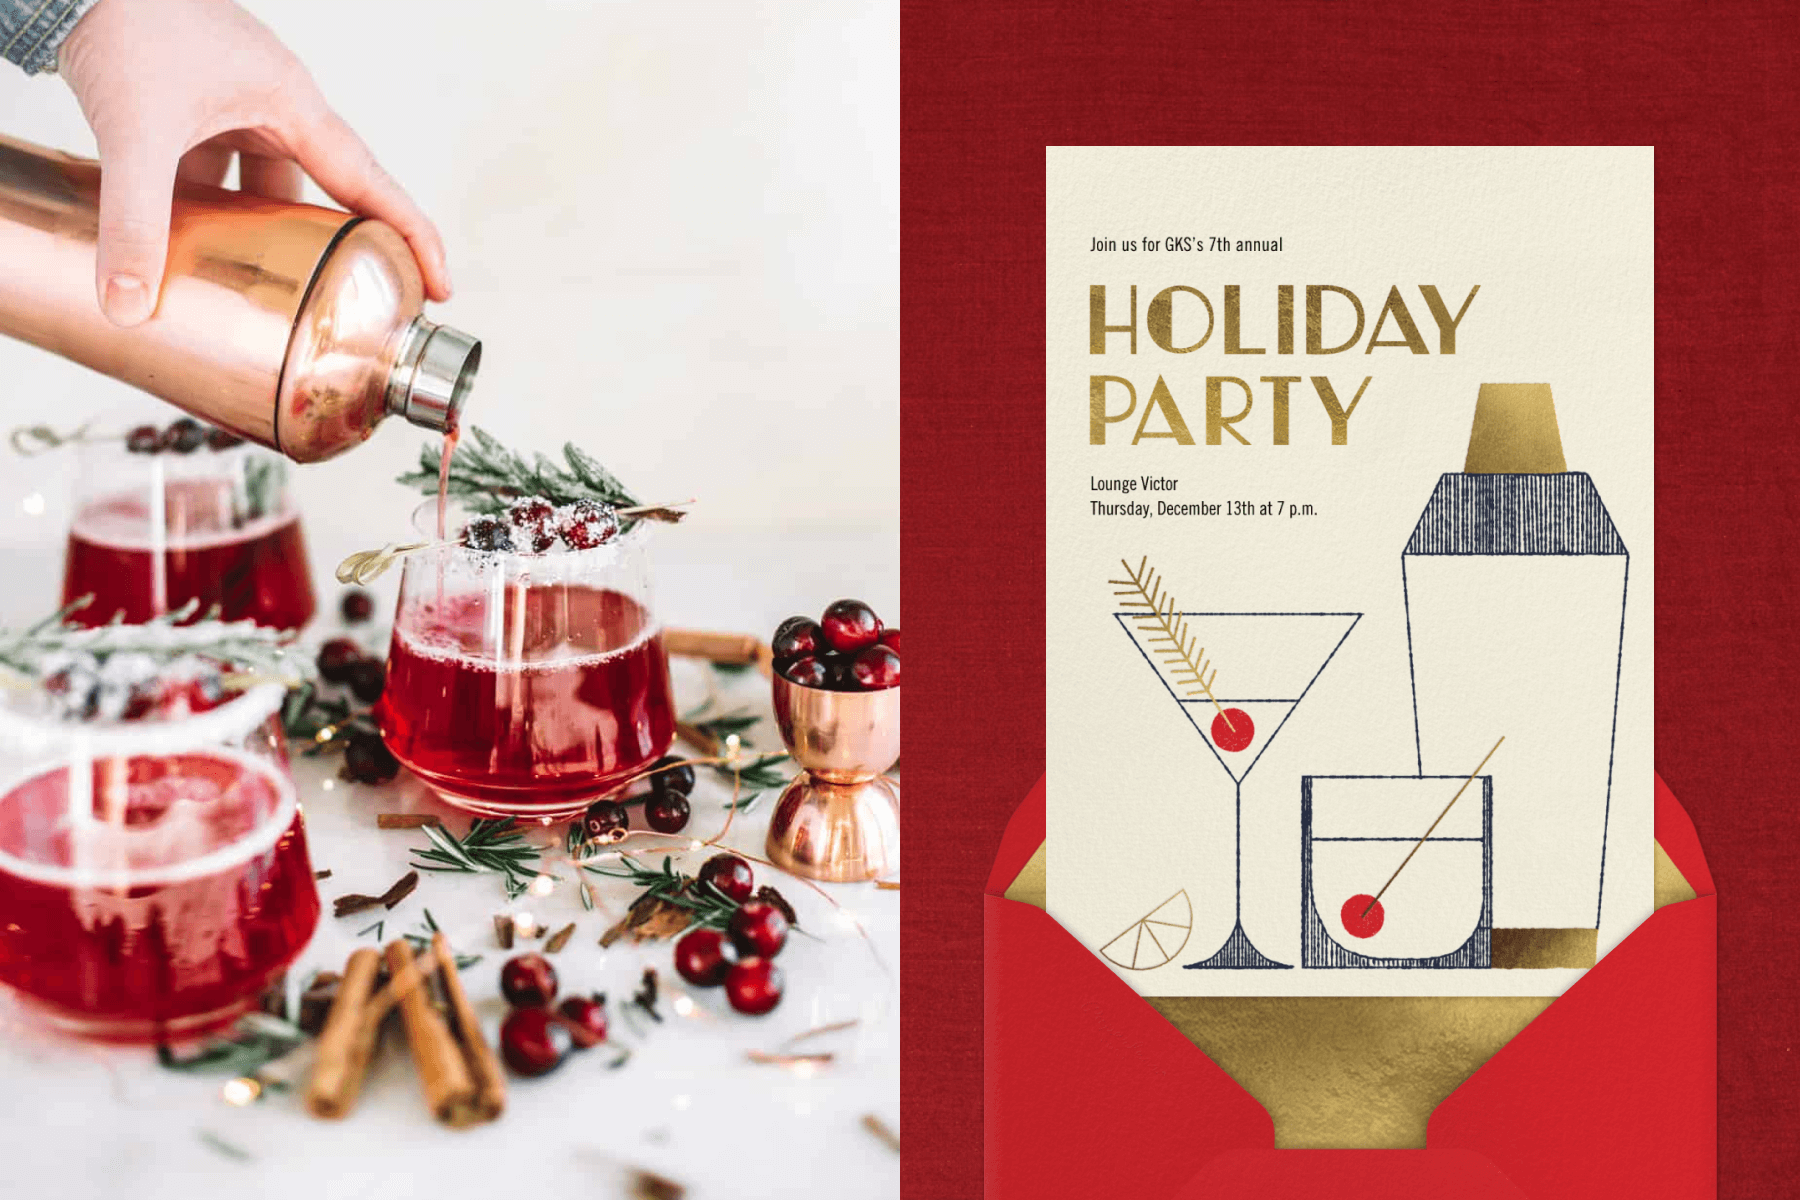 Left: A copper cocktail shaker pours red liquid into stemless glasses garnished with holly and cranberries beside cinnamon and a copper jigger. Right: A holiday party invitation with gold text and line drawings of a martini glass, rocks glass, and cocktail shaker with red garnishes.